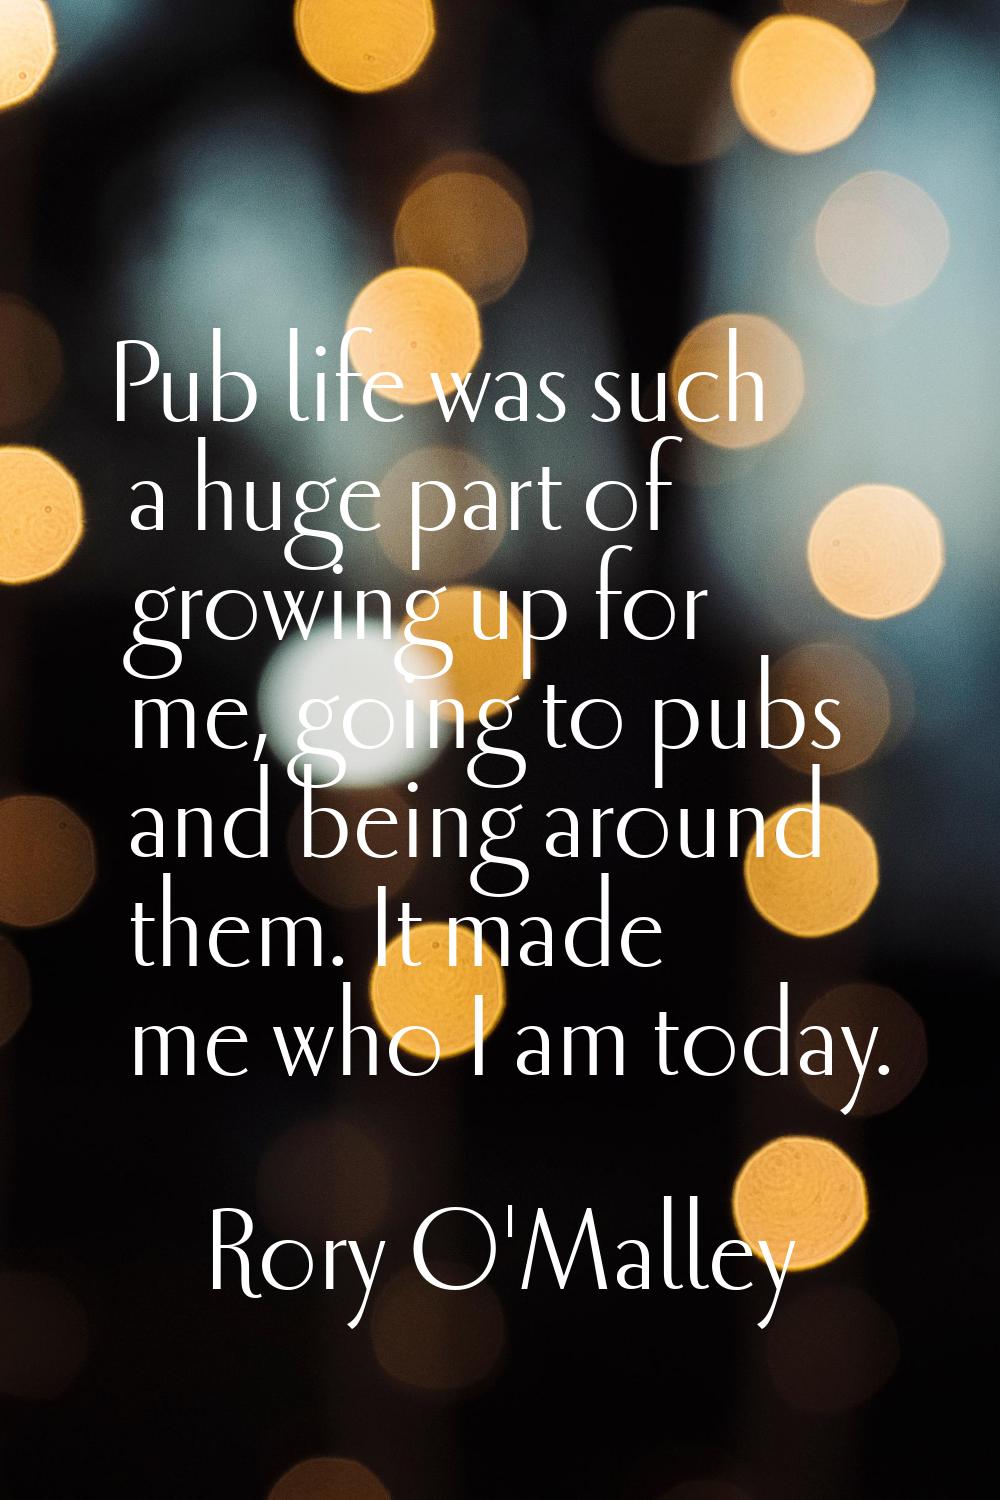 Pub life was such a huge part of growing up for me, going to pubs and being around them. It made me